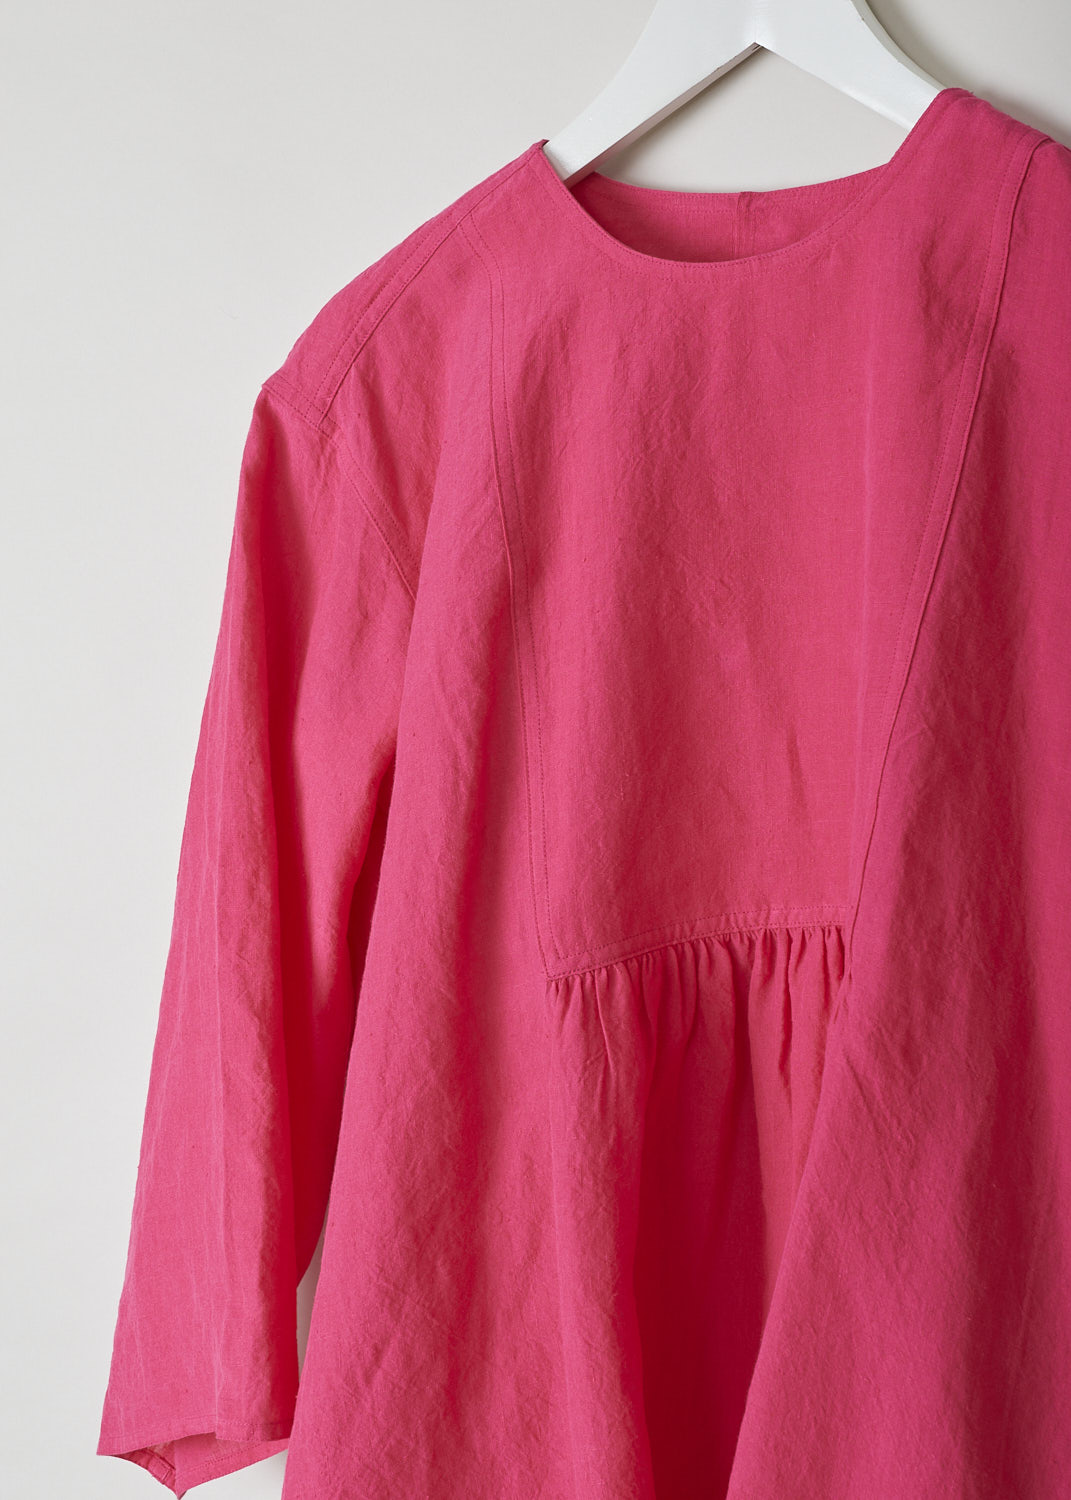 SOFIE Dâ€™HOORE, FUCHSIA COLORED BINETTE TOP, BINETTE_LIFE_FUCHSIA, Pink, Detail, This oversized fuchsia top features a round neckline, dropped shoulders and long sleeves. The A-line top has a square bib-like front with pleated details below. Concealed in the side seams, slanted pockets can be found. The top has an asymmetrical finish, meaning the back is a little longer than the front. 

